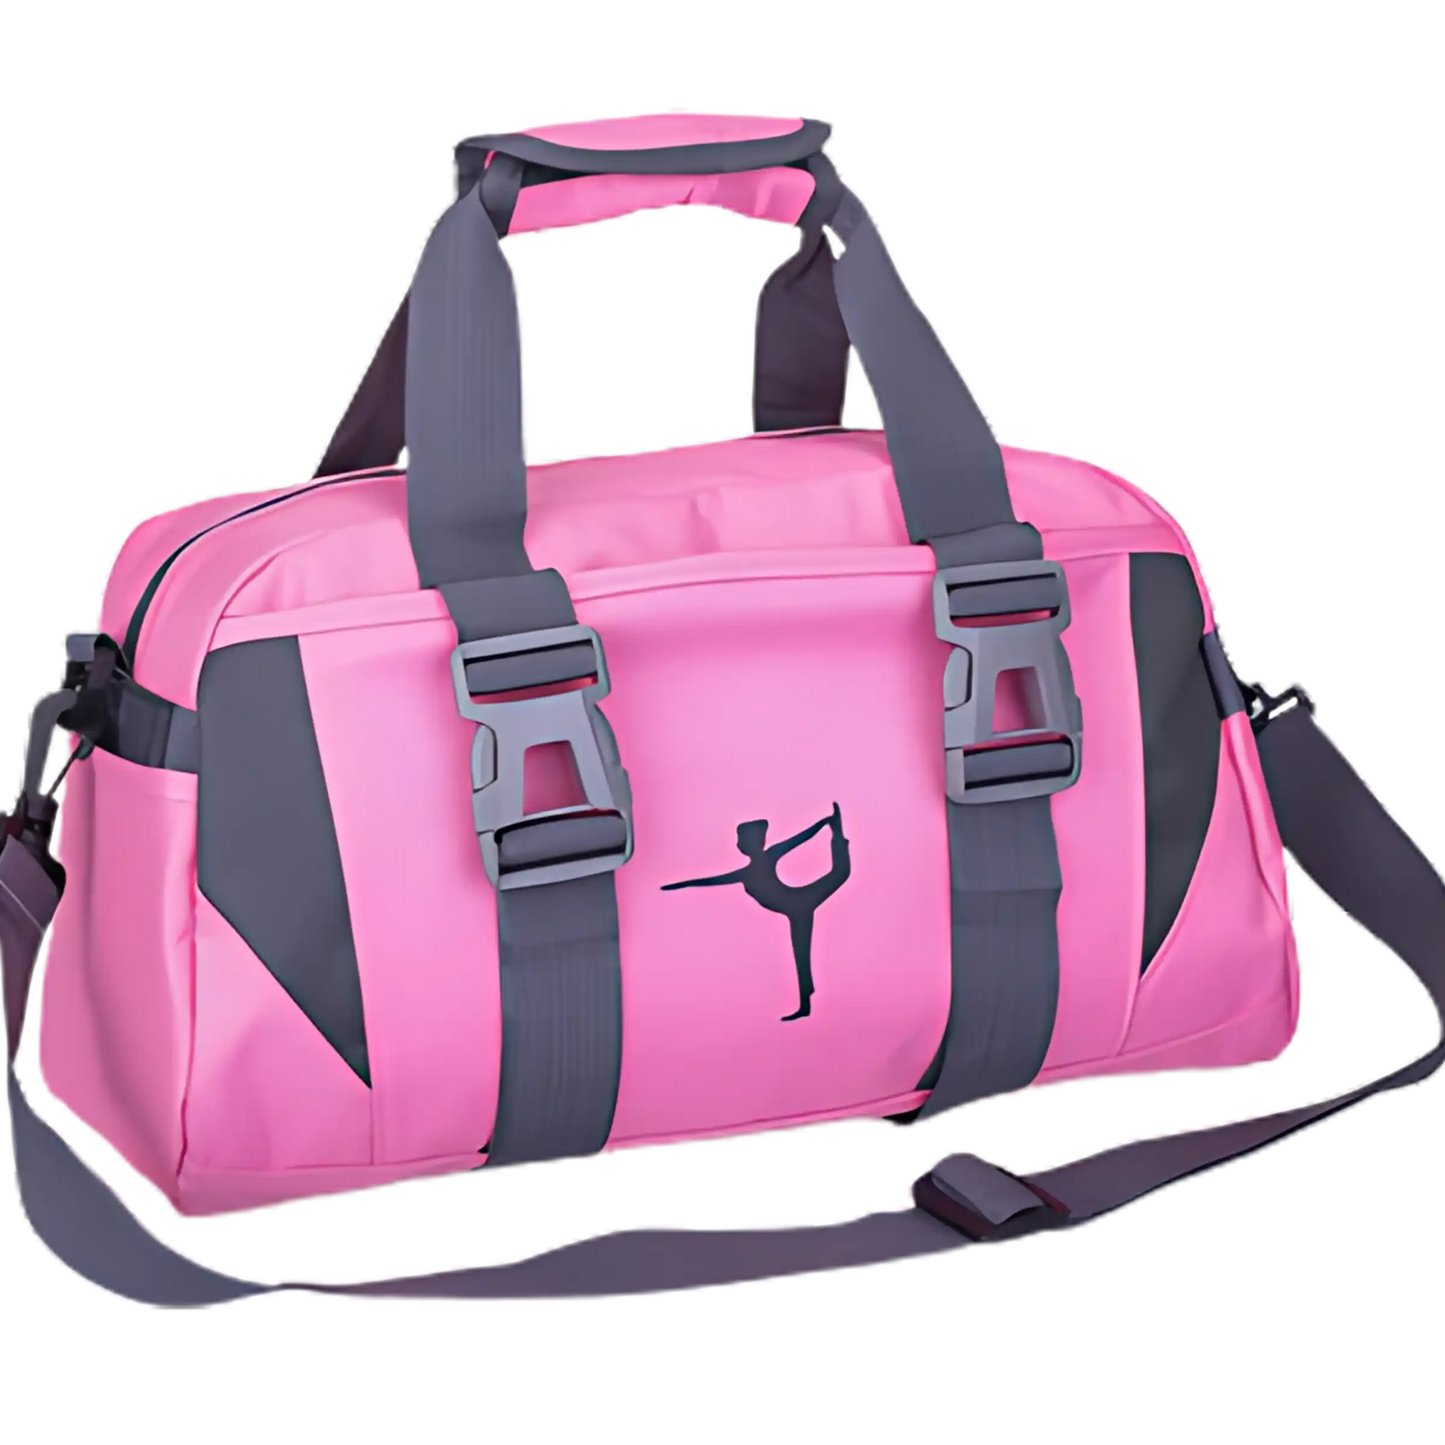 DURABLE WATER-RESISTANT YOGA MAT CARRIER BAG - Pink (45 x